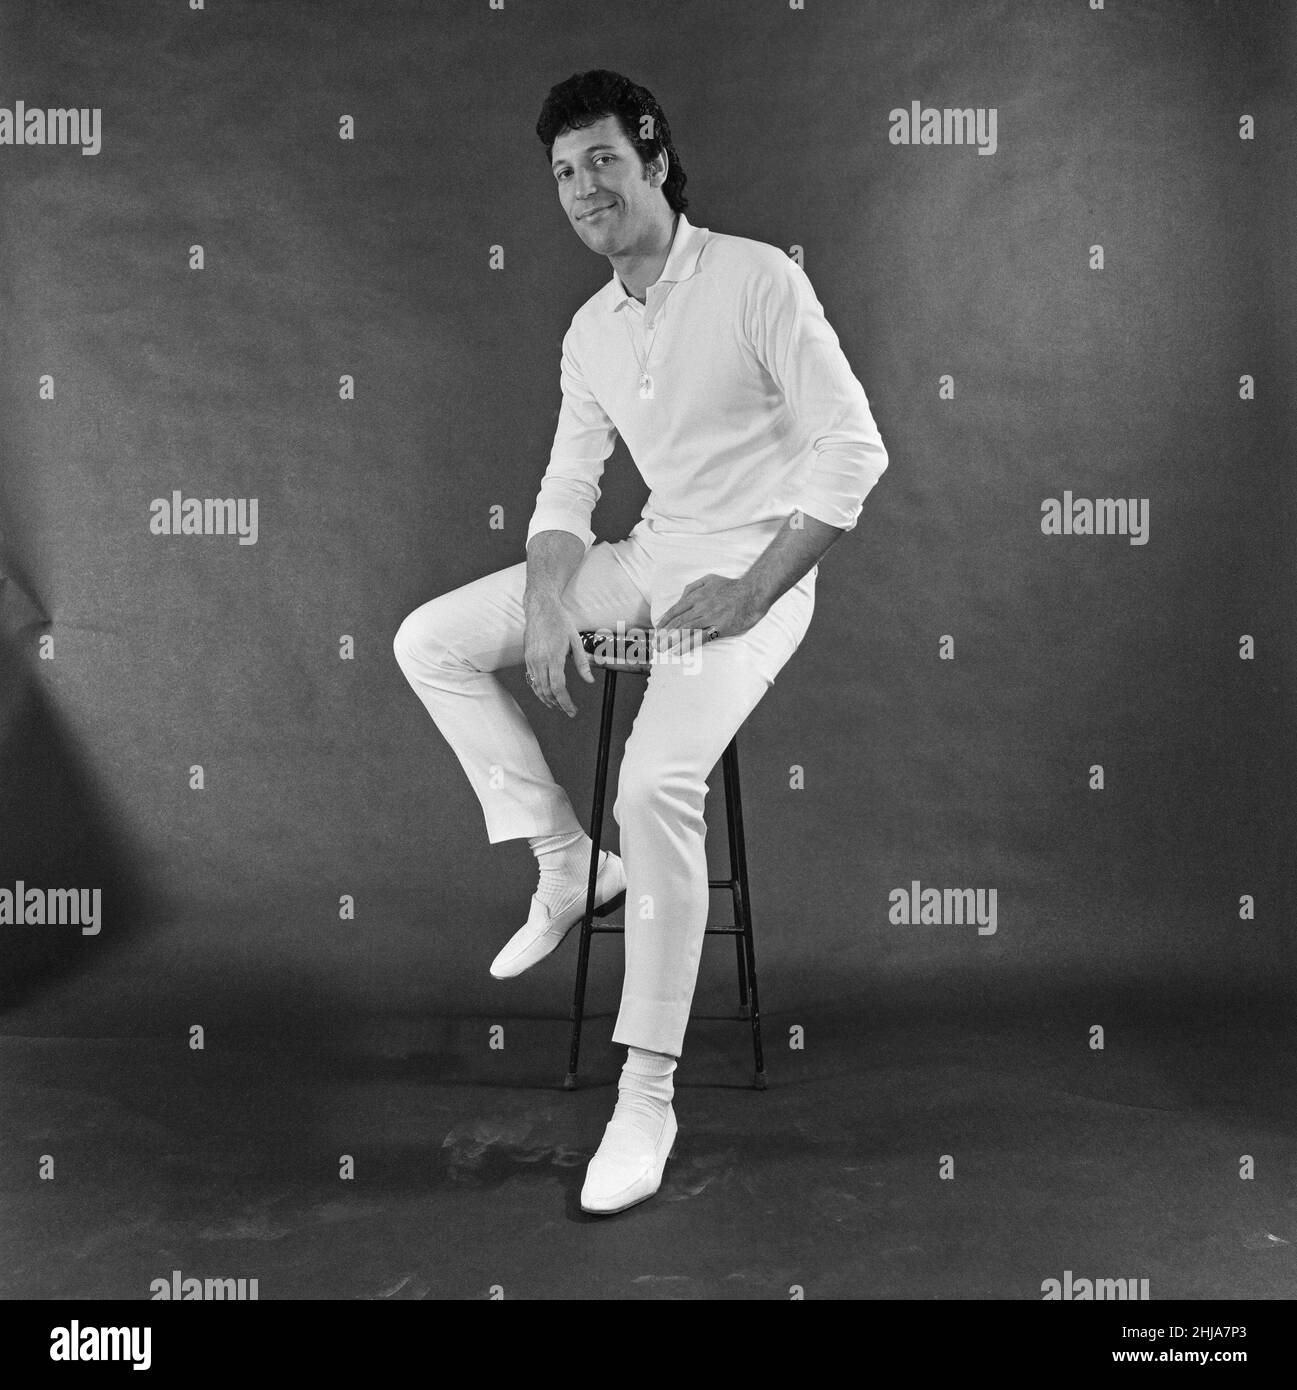 Tom Jones, singer from Wales. Also Sir Tom Jones.Born Thomas John Woodward on 7th June 1940 in Pontypridd, Glamorgan, South Wales.  At this time in Tom's career, he had just released his first solo single, 'Chills and Fever' in August 1964.  But in 1965, Tom became a household name with his major hit 'It's Not Unusual'.  Other hits followed in the the 1960s such as What's New Pussycat, The Green Green Grass of Home, and Delilah.  Picture taken 24th September 1964 Stock Photo